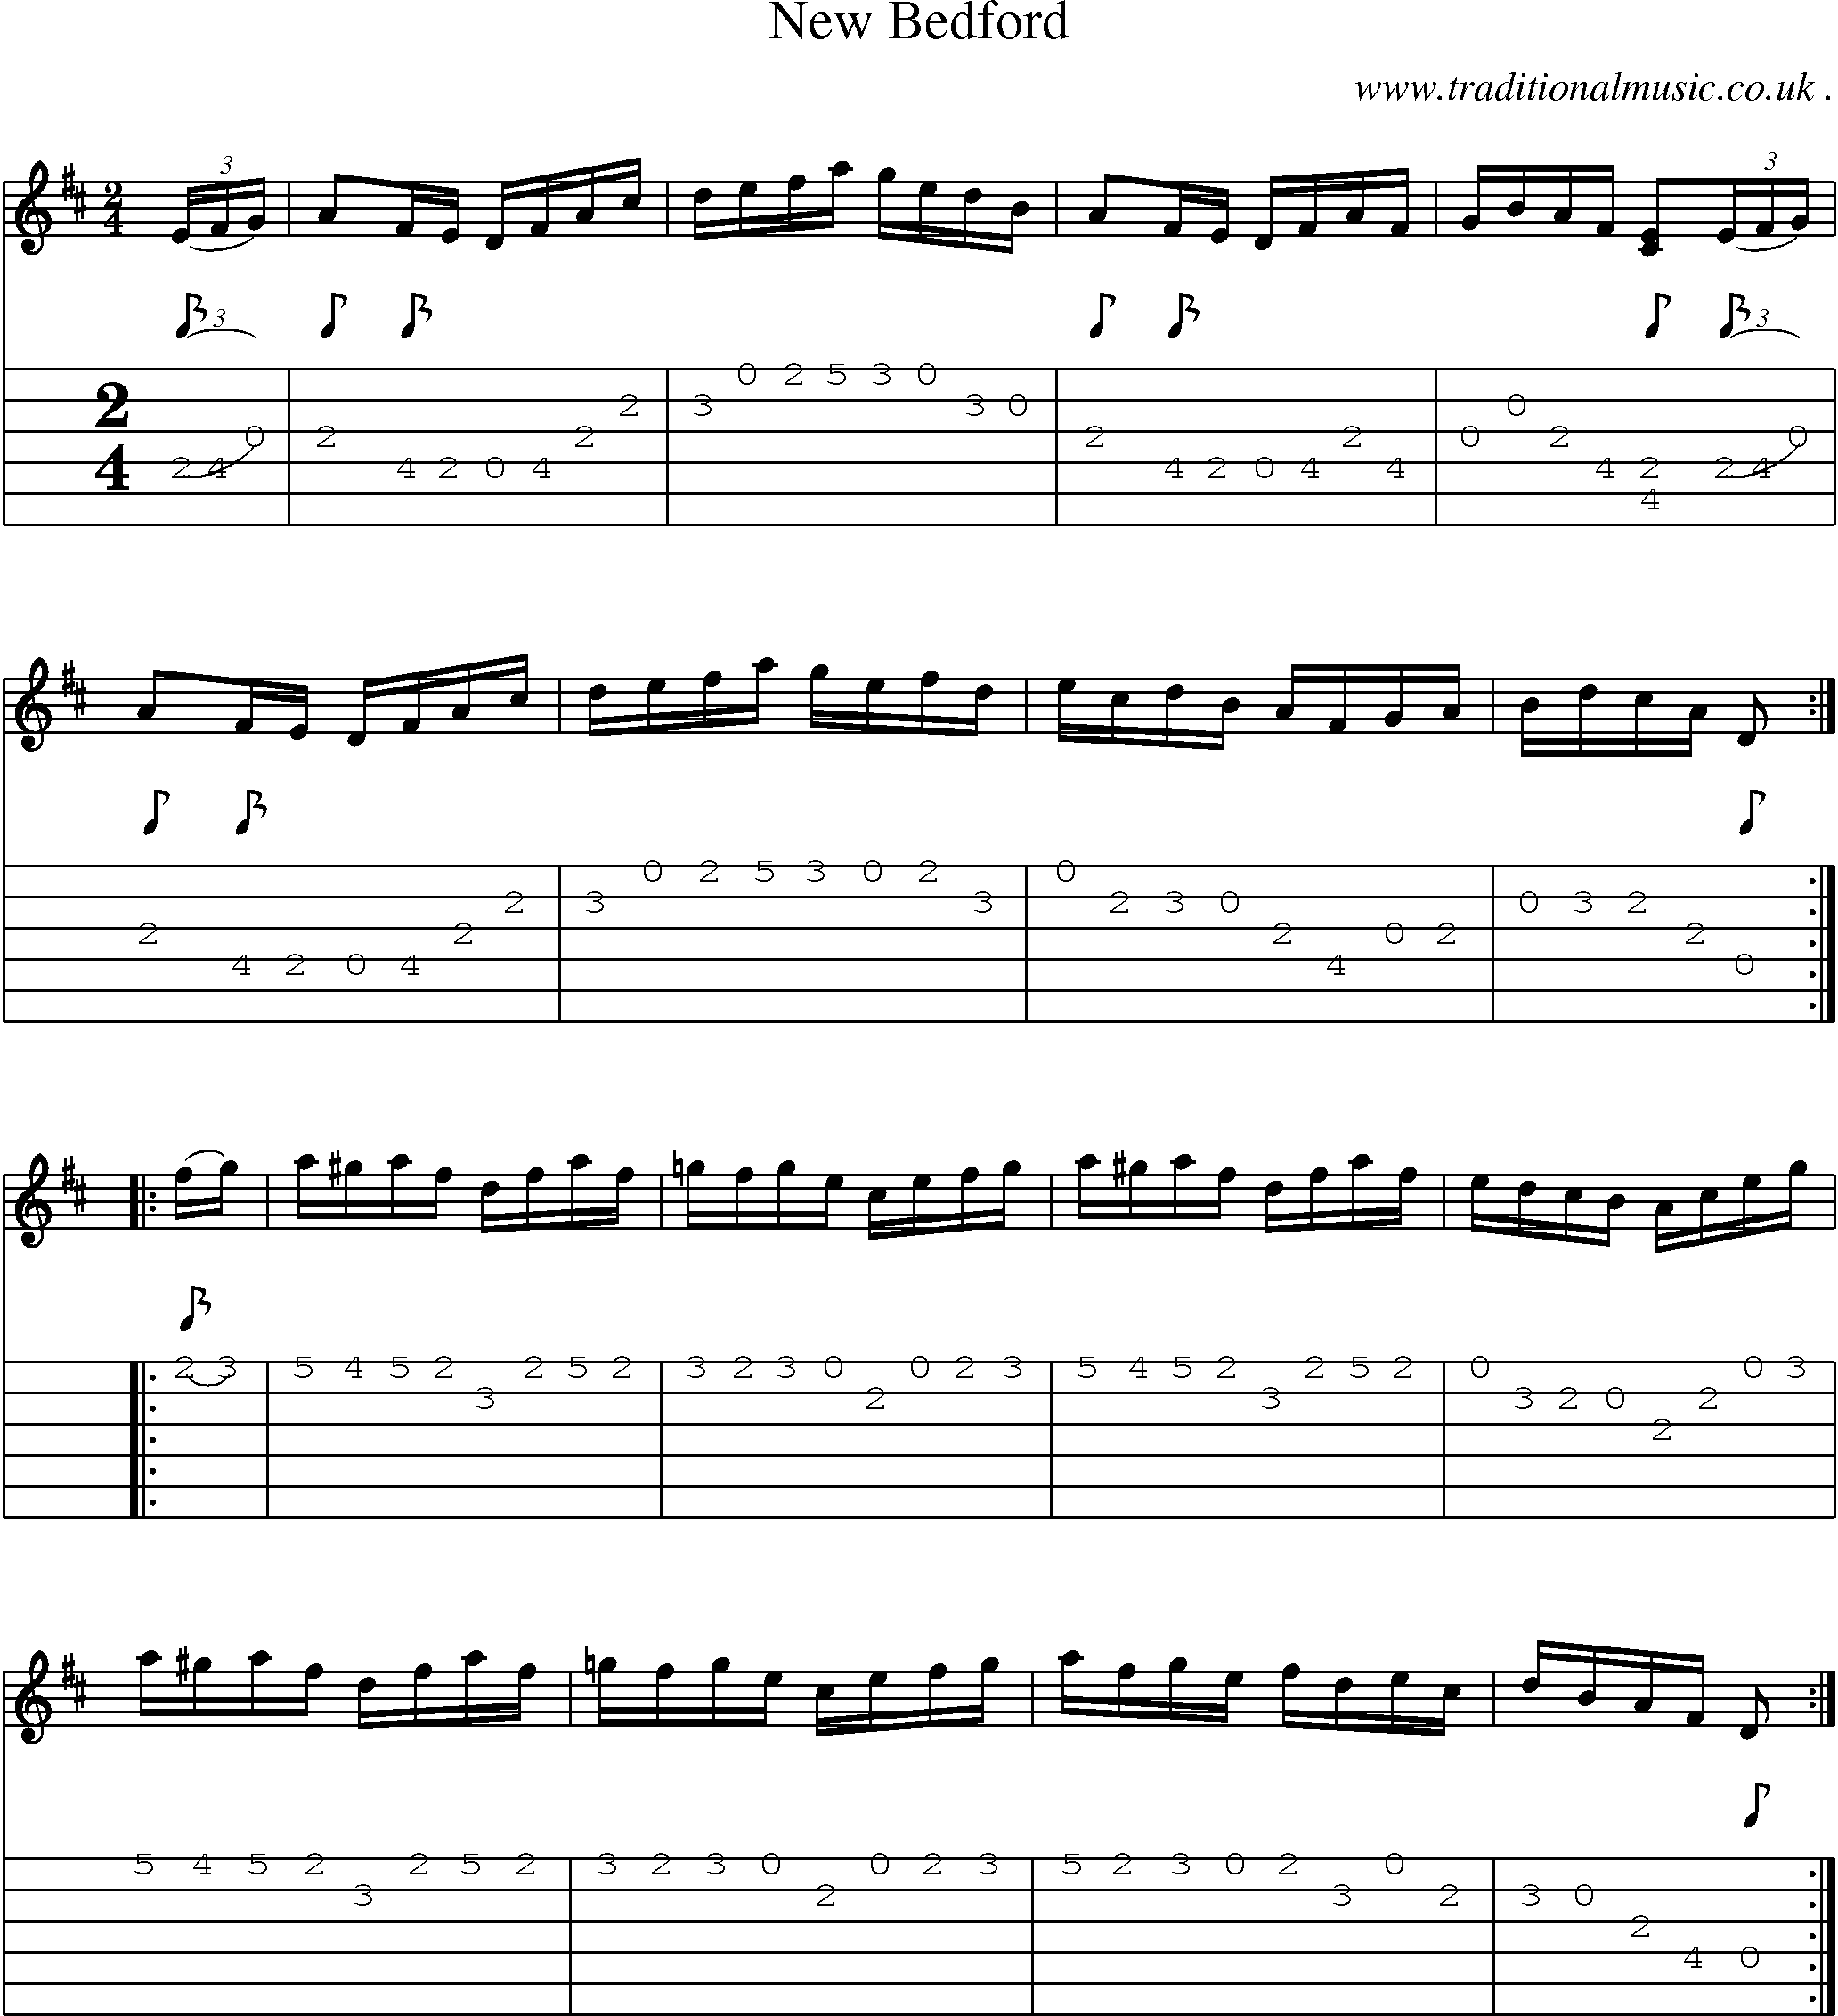 Sheet-Music and Guitar Tabs for New Bedford